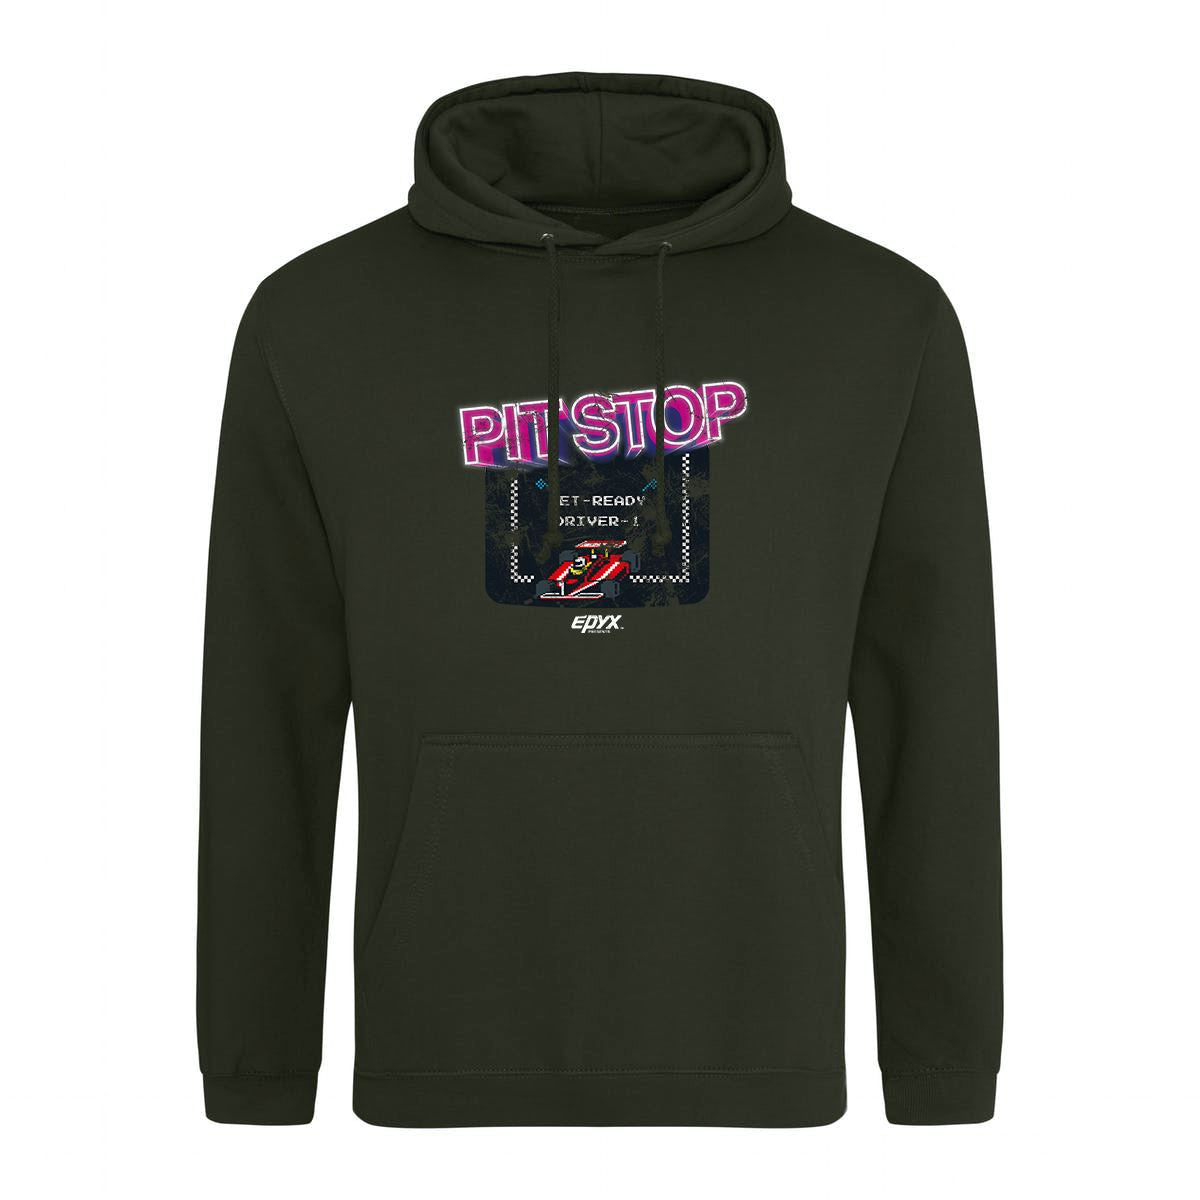 Pitstop Ready Driver 1 Retro Gaming Hoodie Hoodie Seven Squared Small 36" Chest Combat Green 